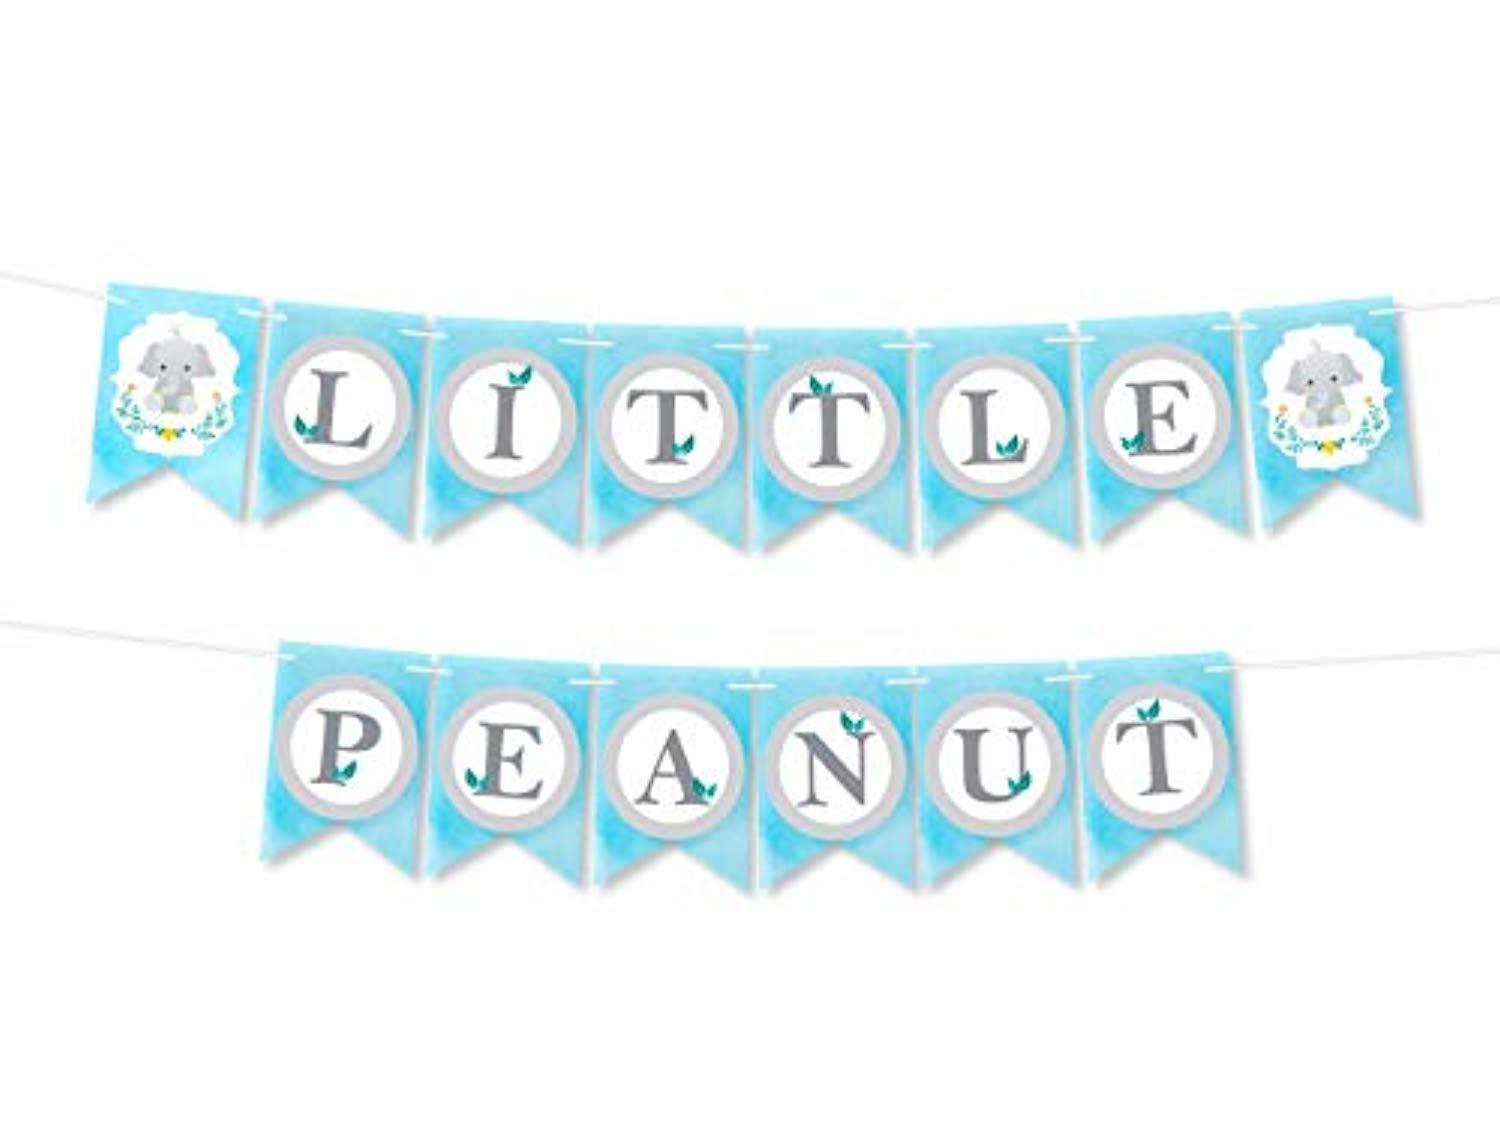 biografi mixer Vil have Little Peanut Baby Shower Boy Banner Decoration-Dumbo Party Supplies- Blue  Party Home Decorations Party Kit-little Elephant Blue Baby Shower Banner  Pennant Or Birthday Party Elephant Decor – BOSTON CREATIVE COMPANY